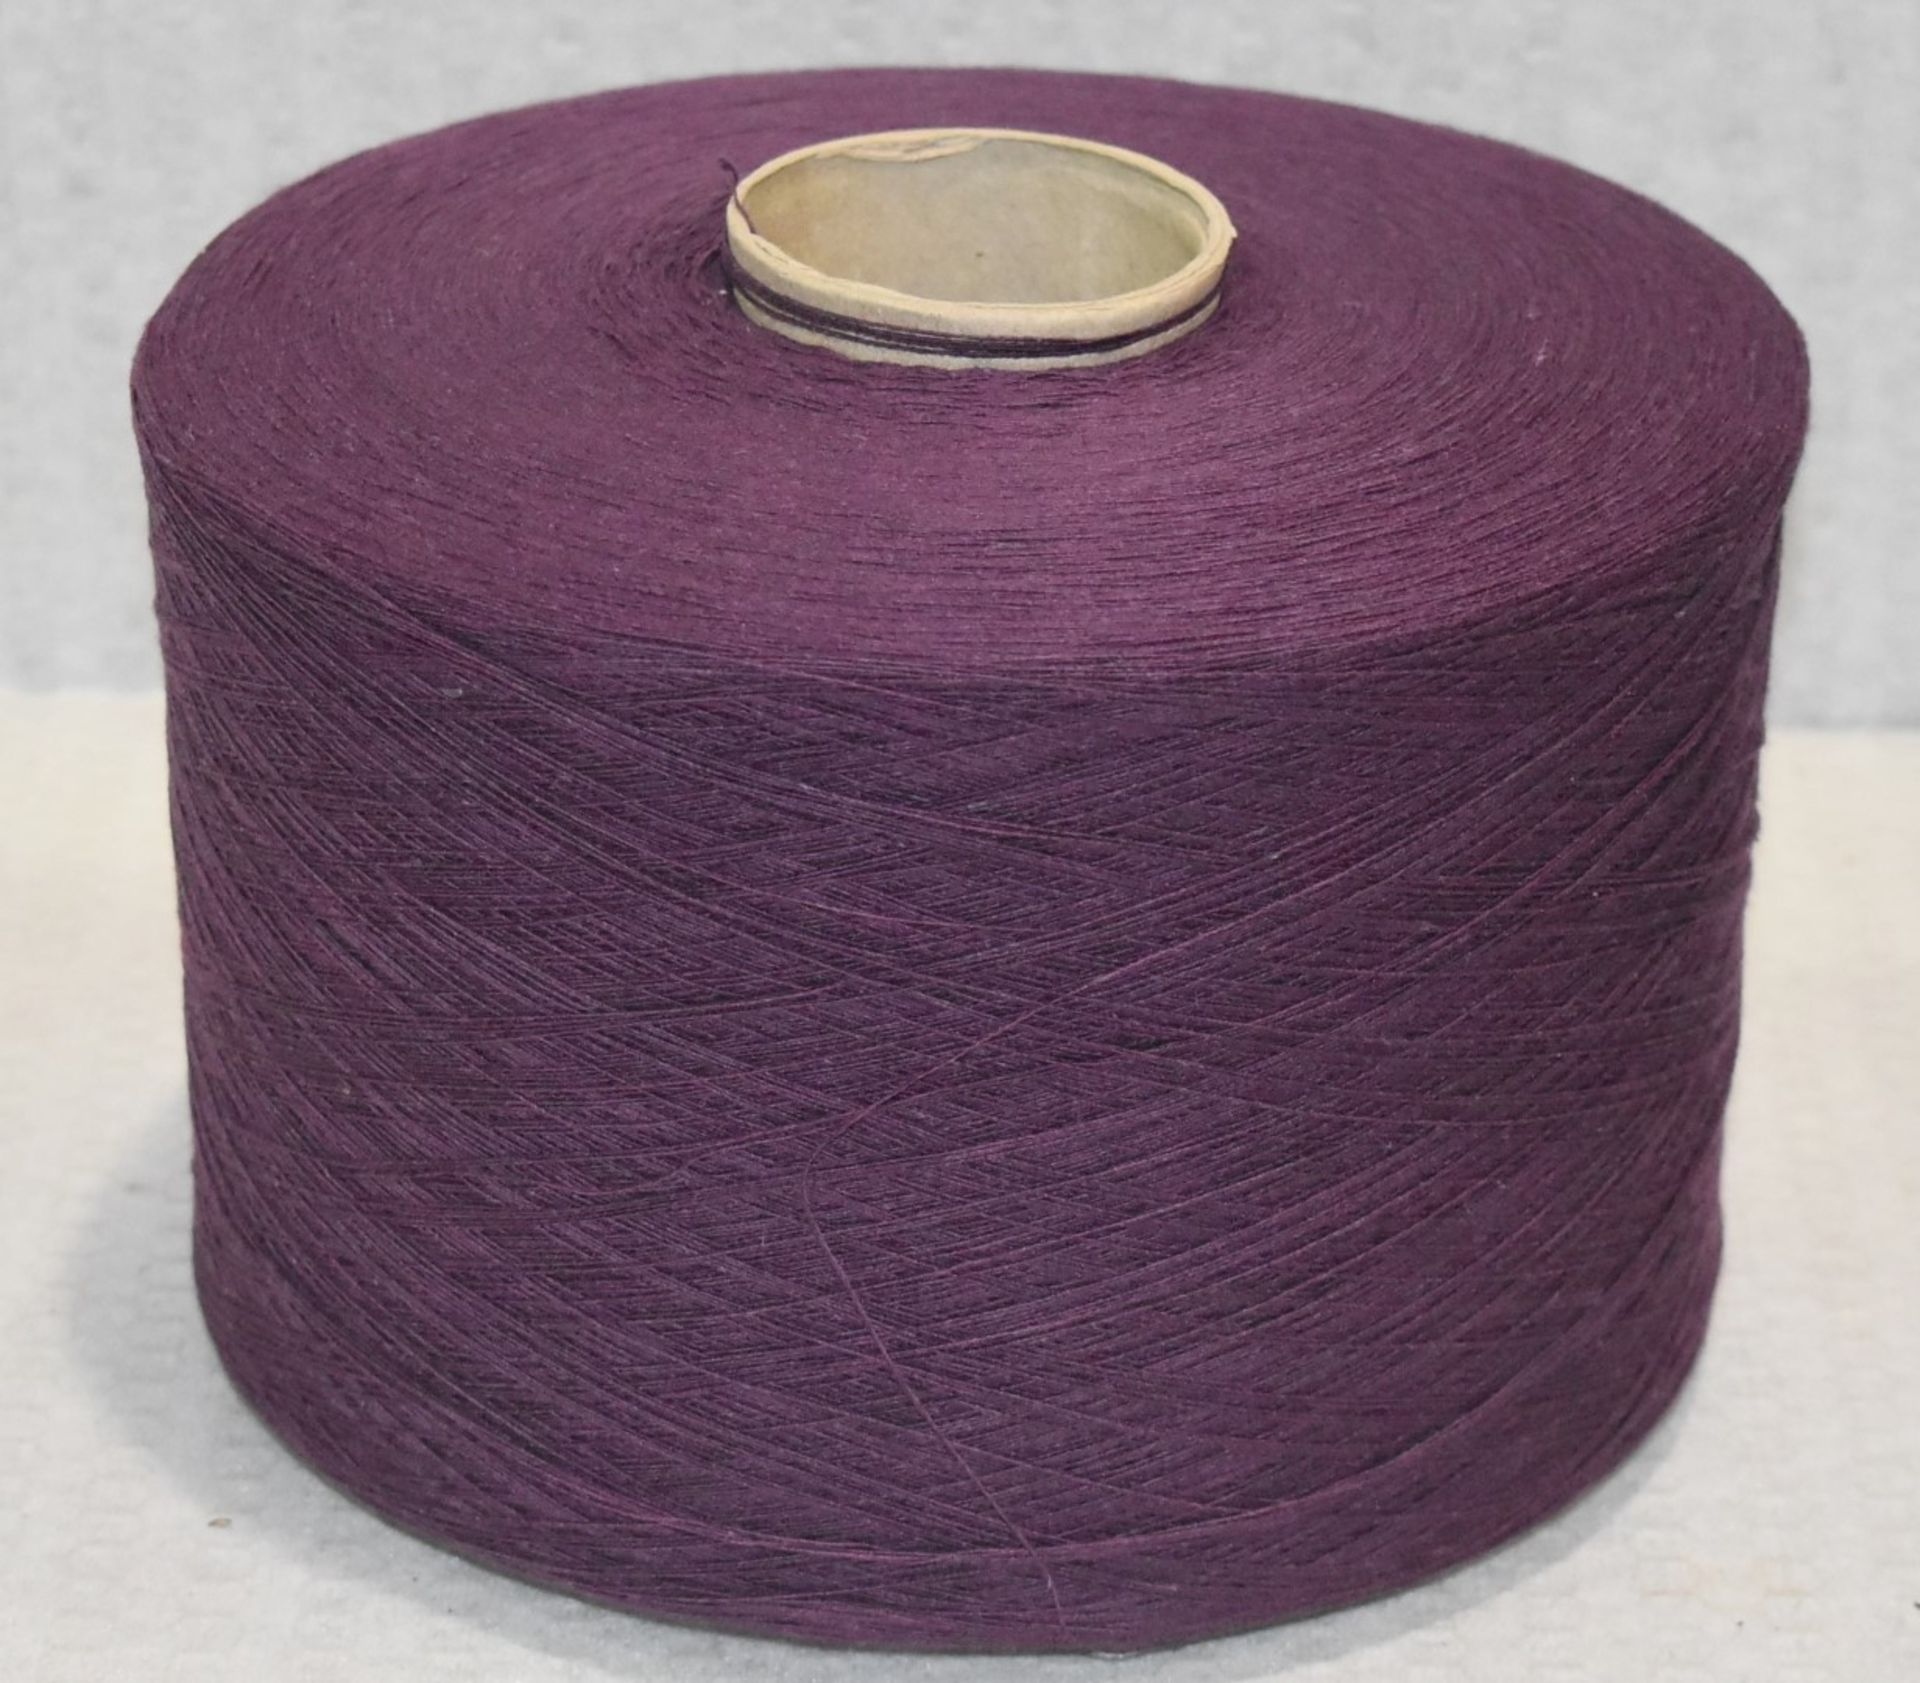 12 x Cones of 1/13 MicroCotton Knitting Yarn - Purple - Approx Weight: 2,300g - New Stock ABL Yarn - Image 5 of 15